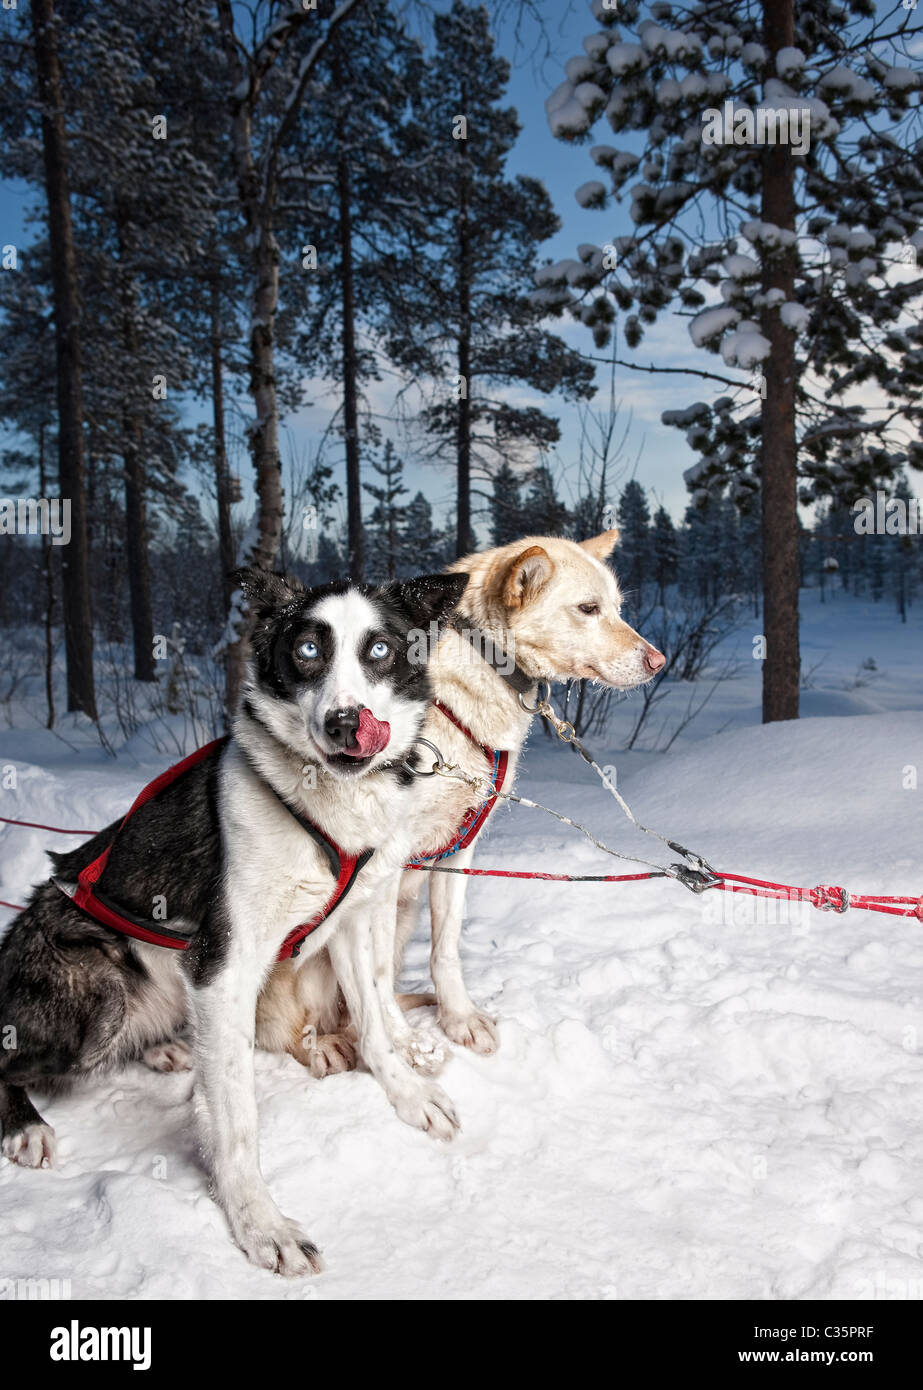 Huskies. Working sled dogs, Lapland, Sweden. Stock Photo